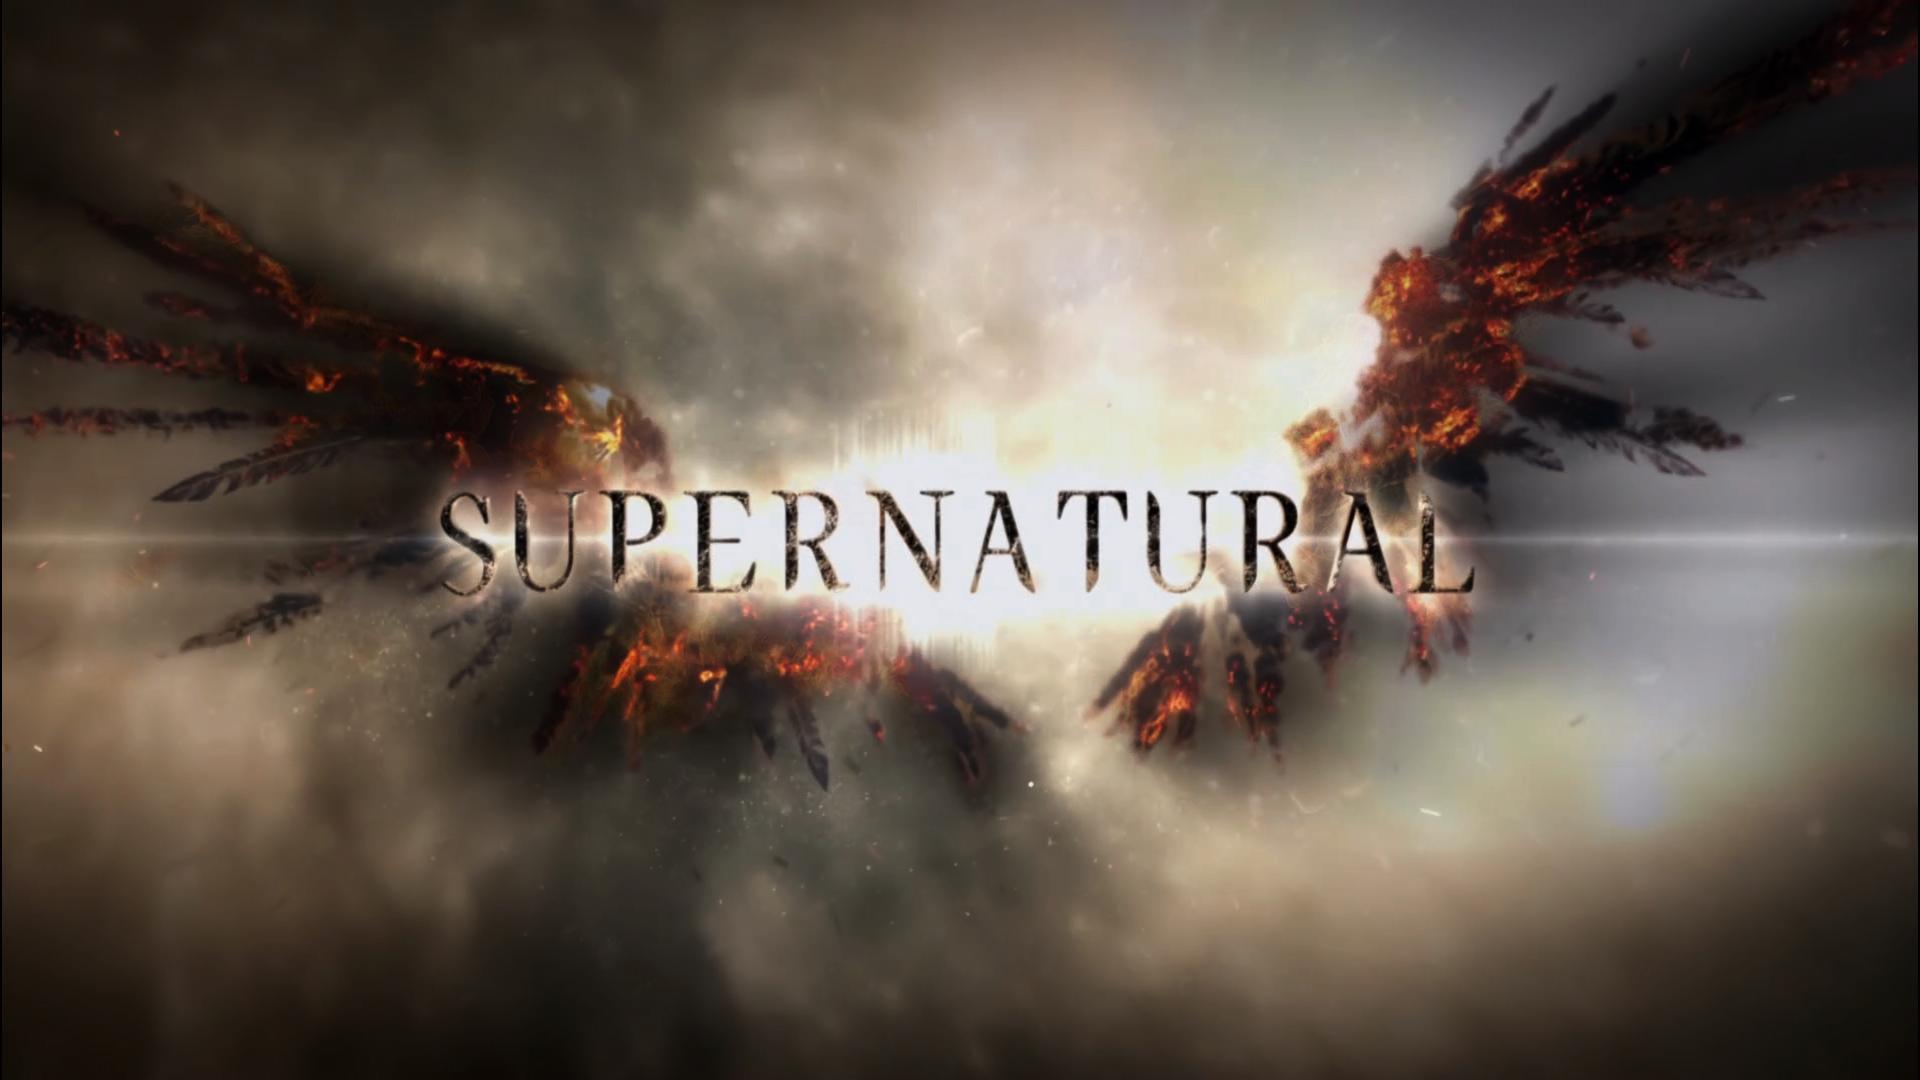 made The supernatural intro into a Wallpaper 1920x1080   Imgur